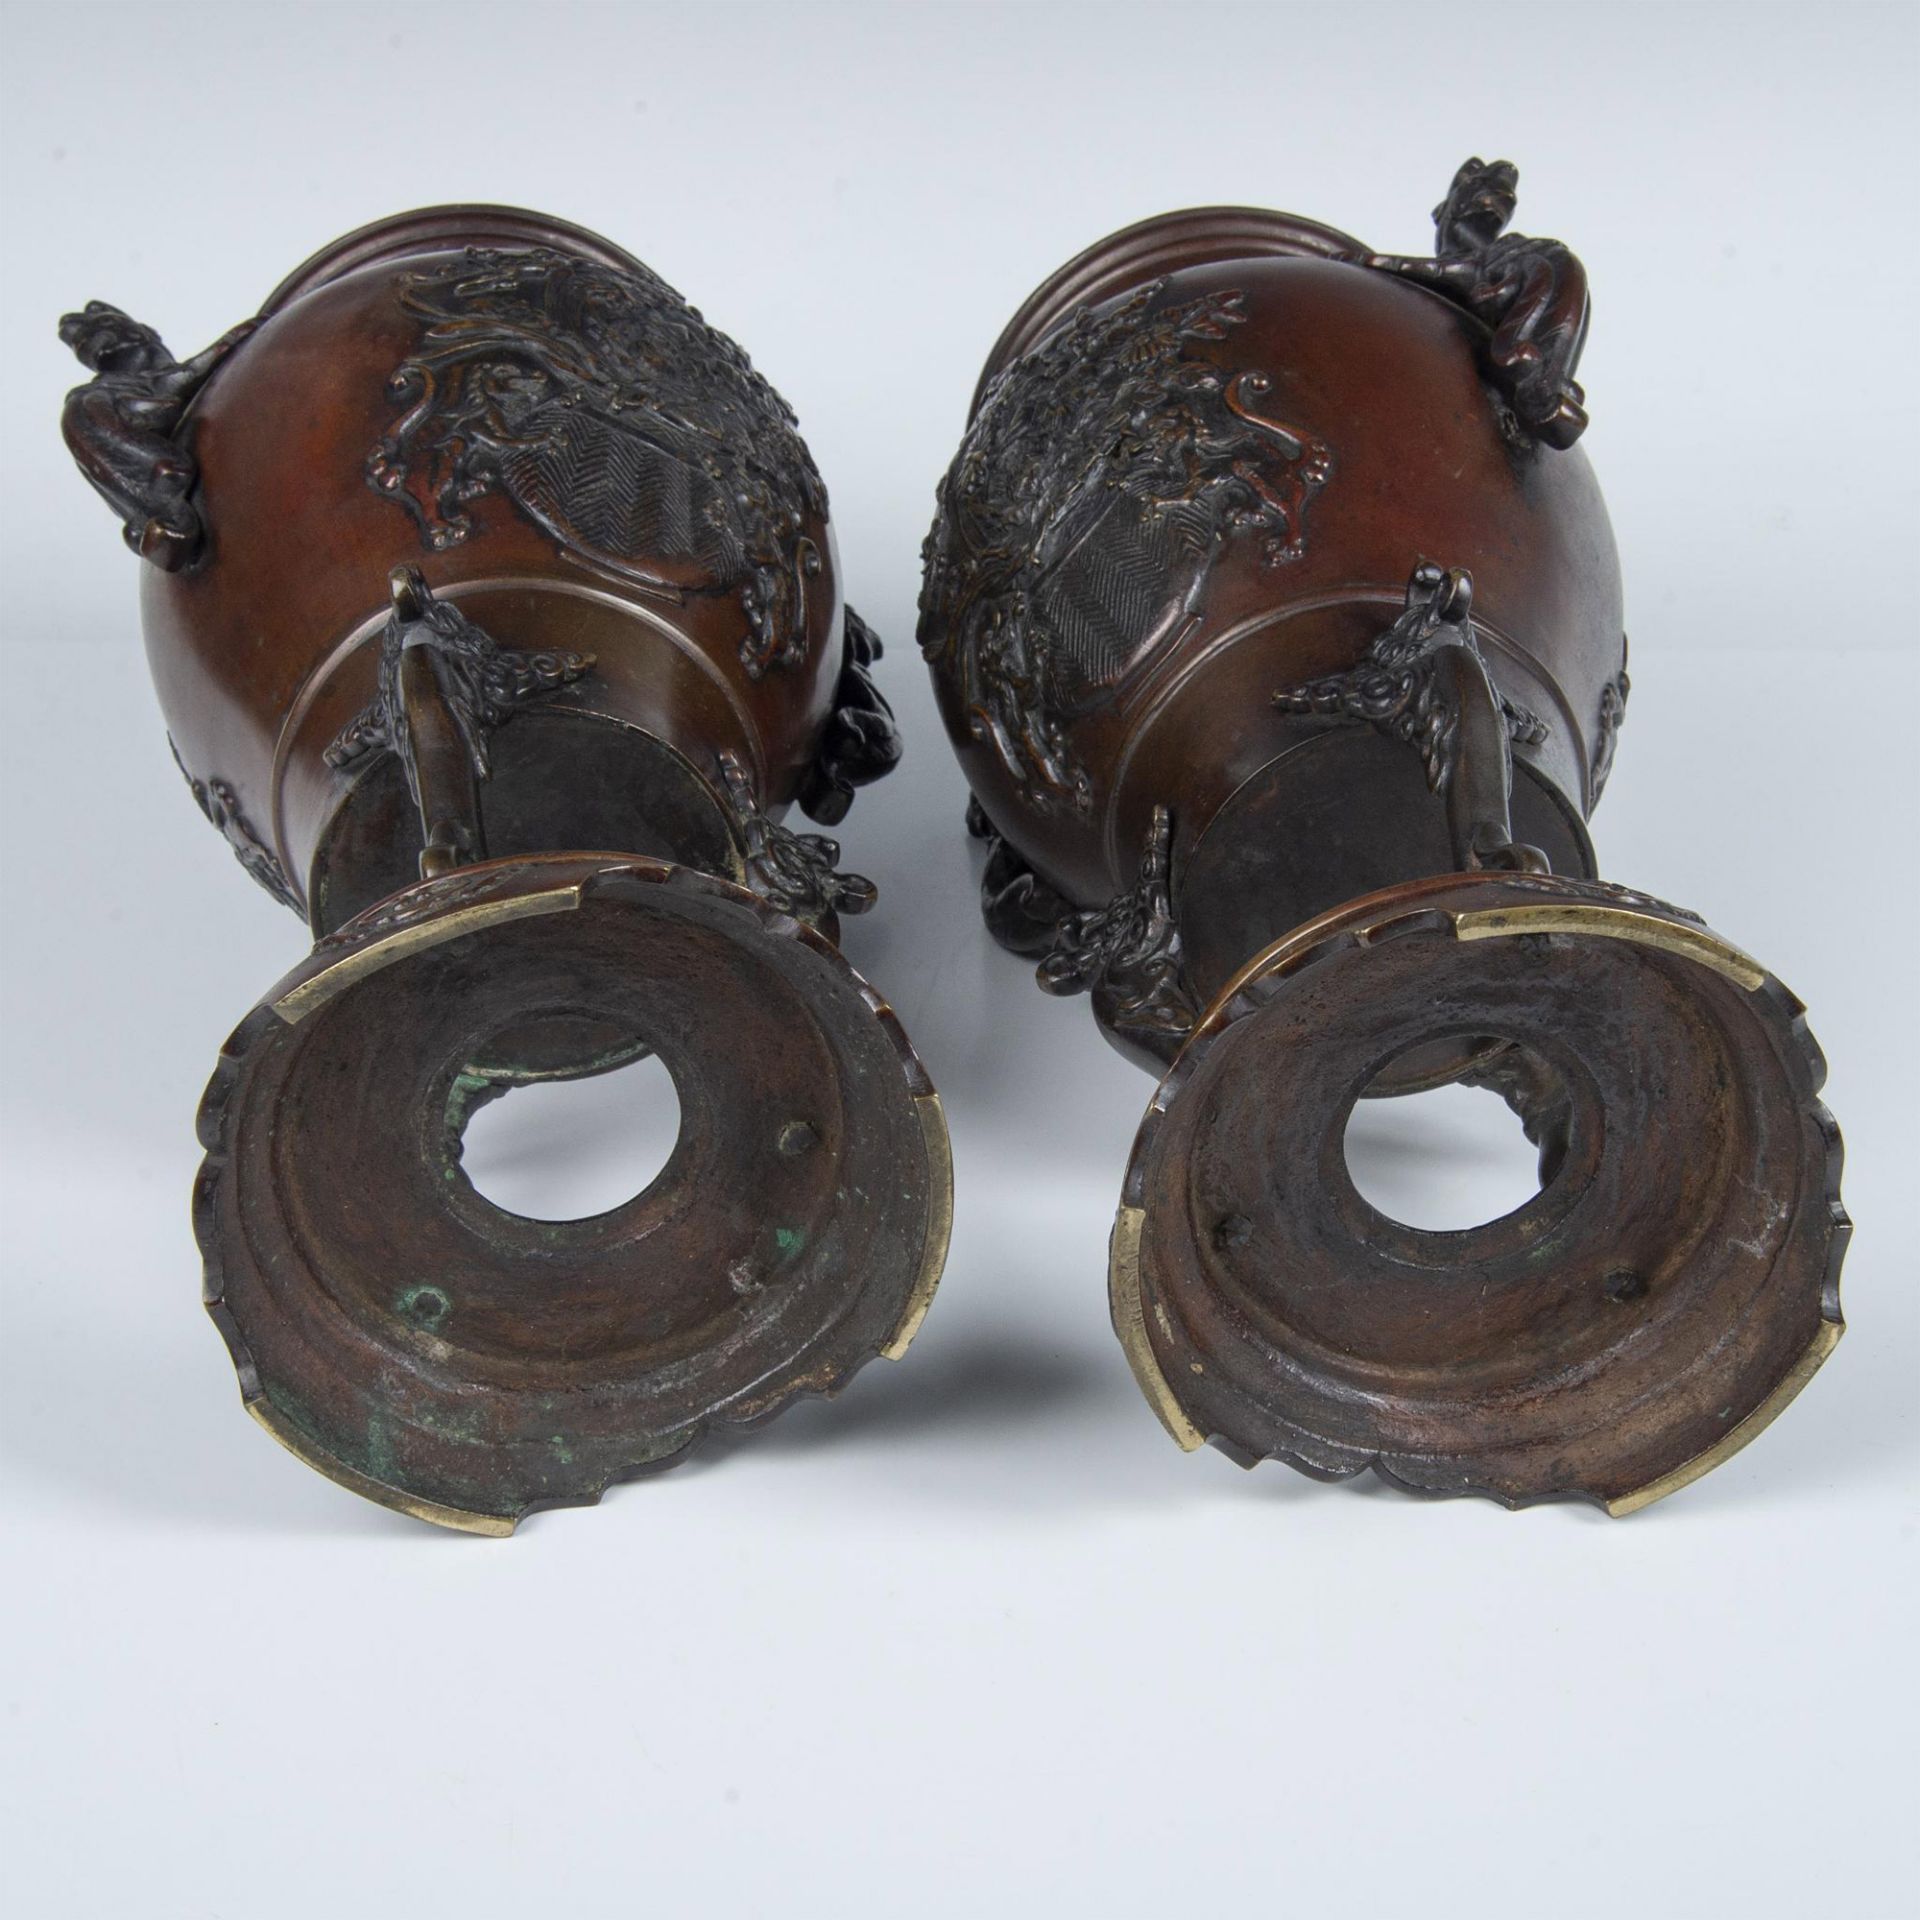 Pair of Antique Japanese Bronze Urns with Griffins Designs - Image 7 of 7